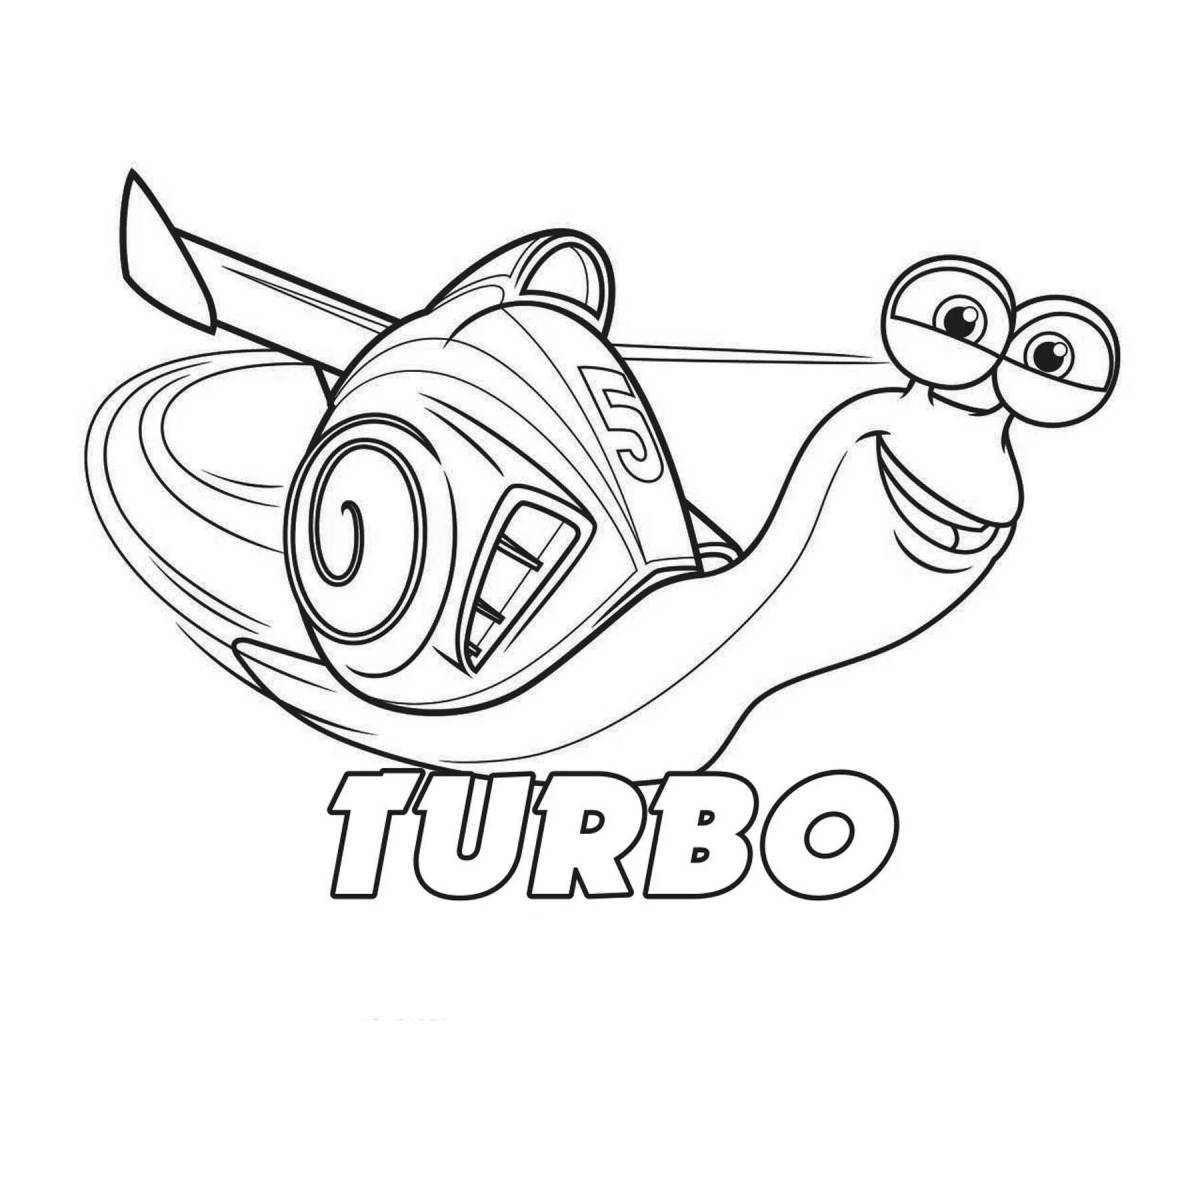 Coloring funny turbo snail